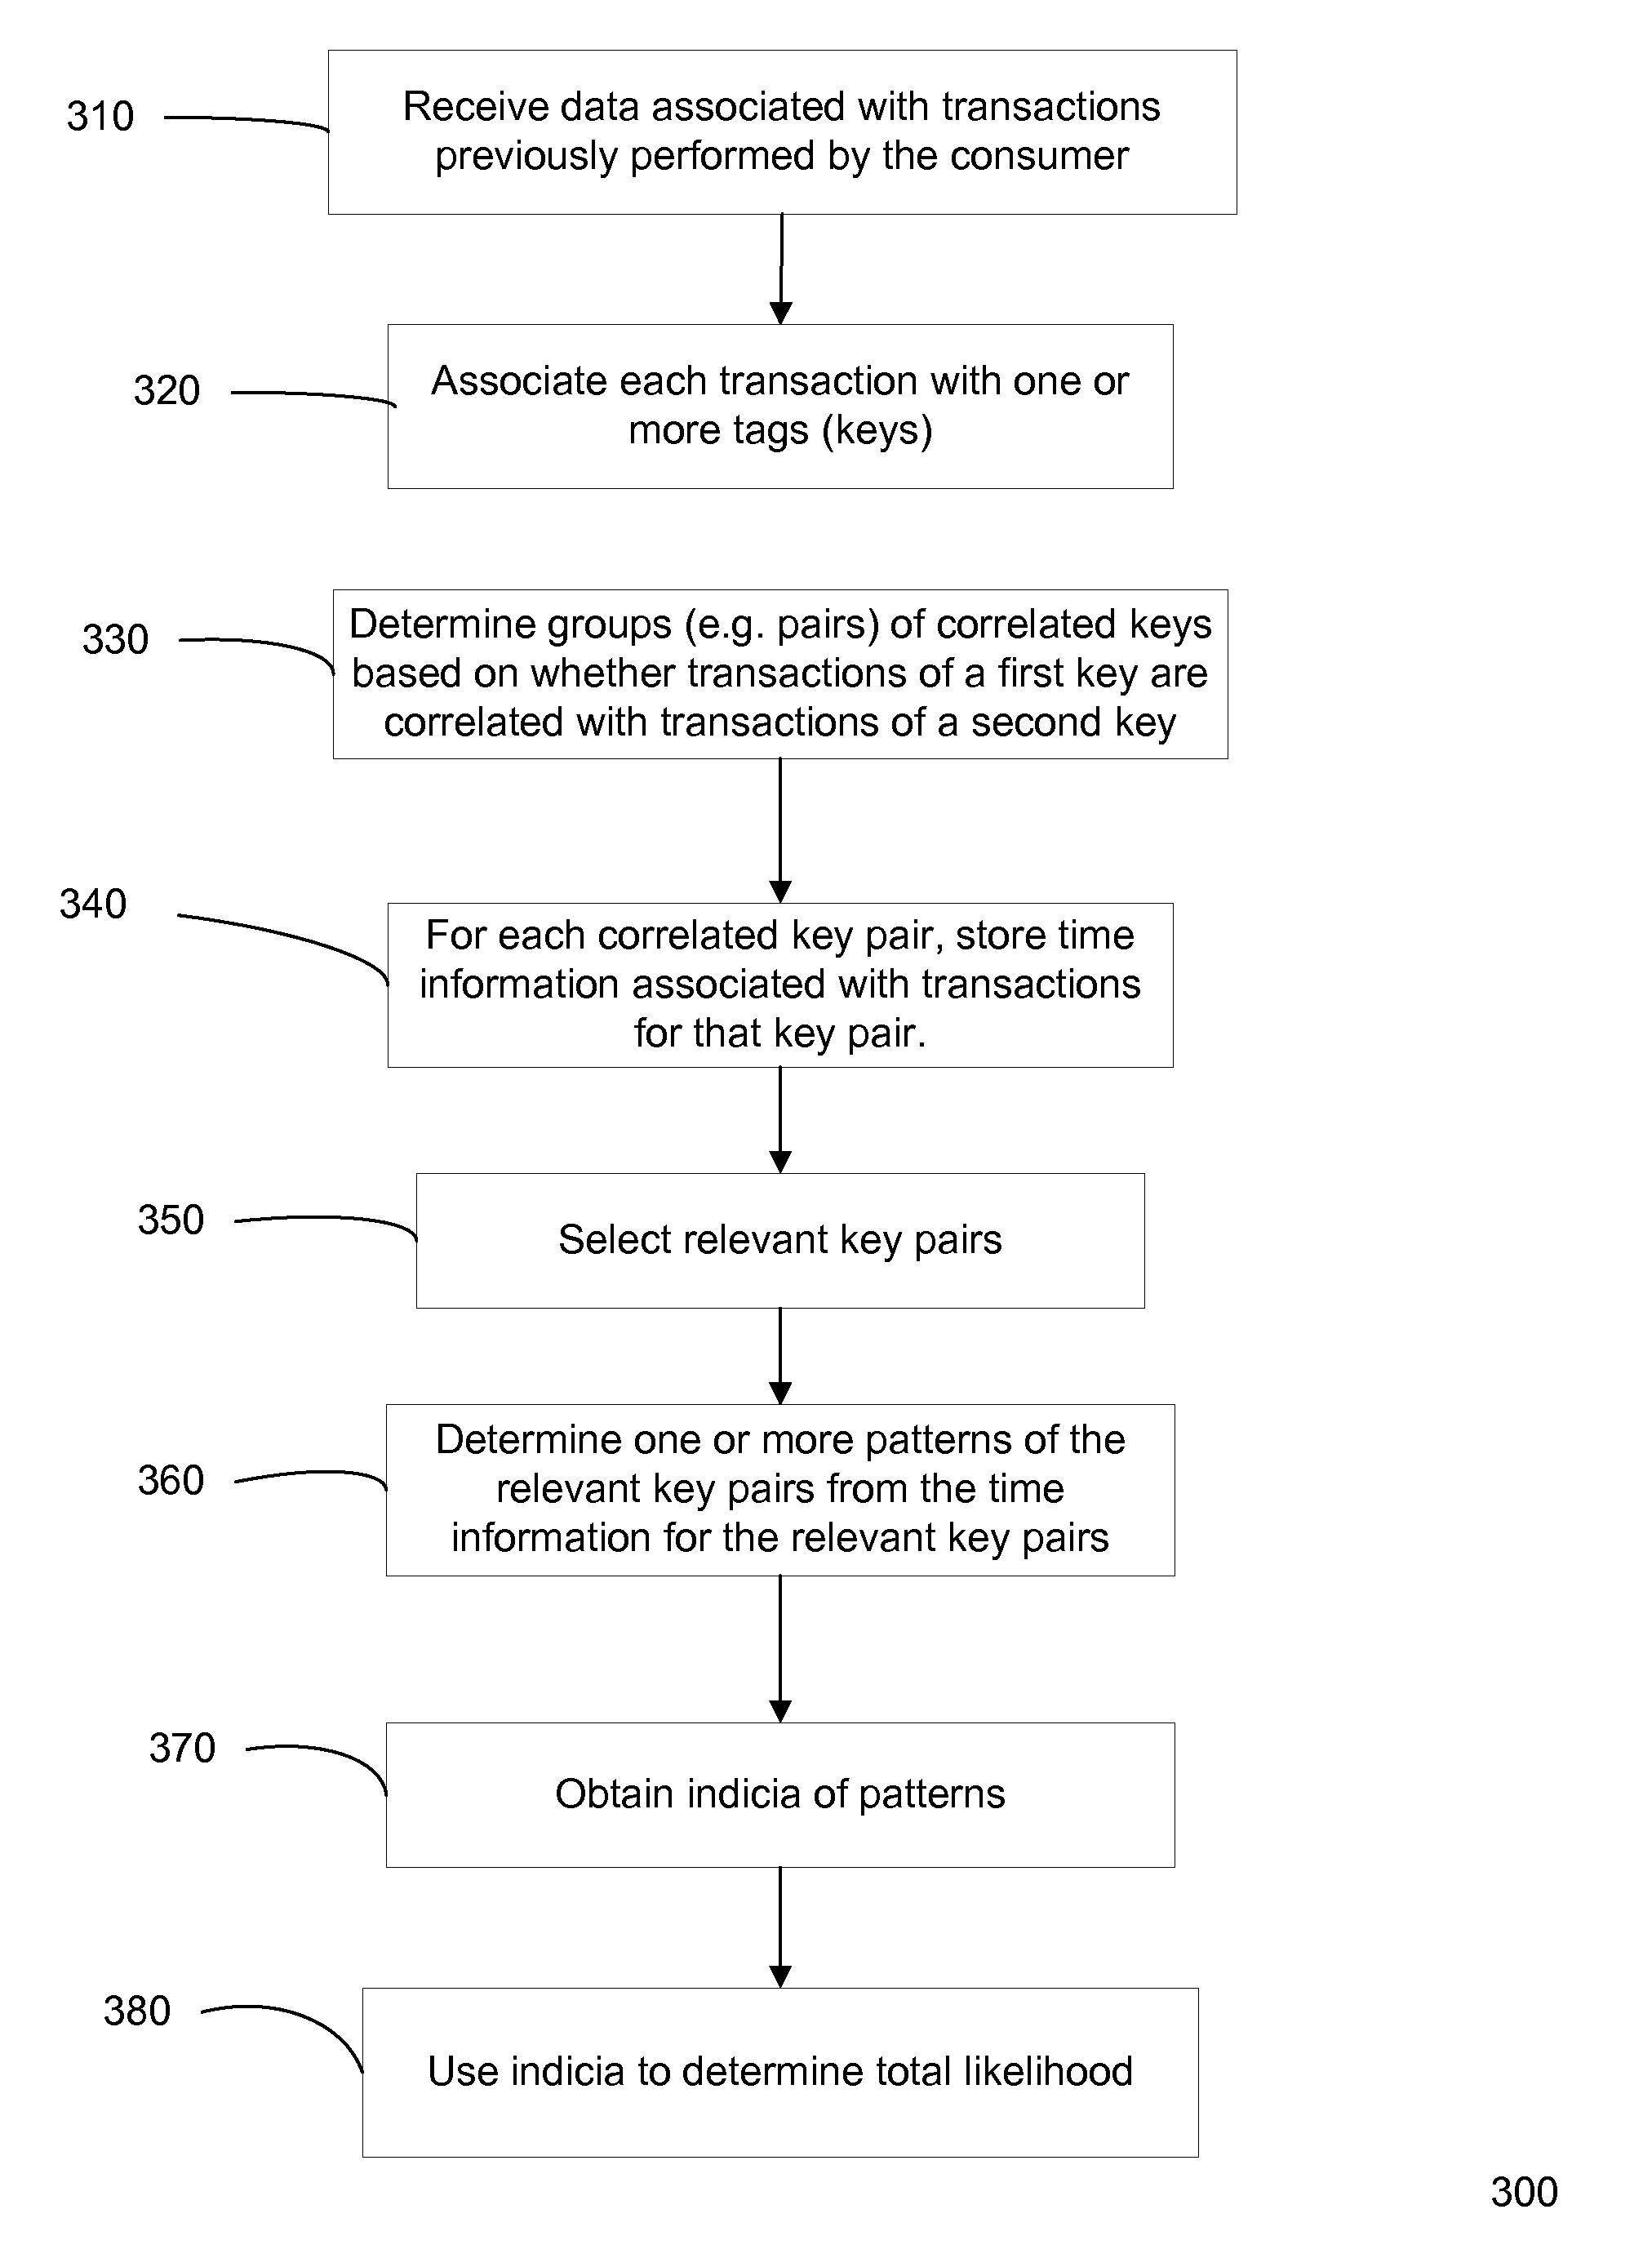 Frequency-based transaction prediction and processing